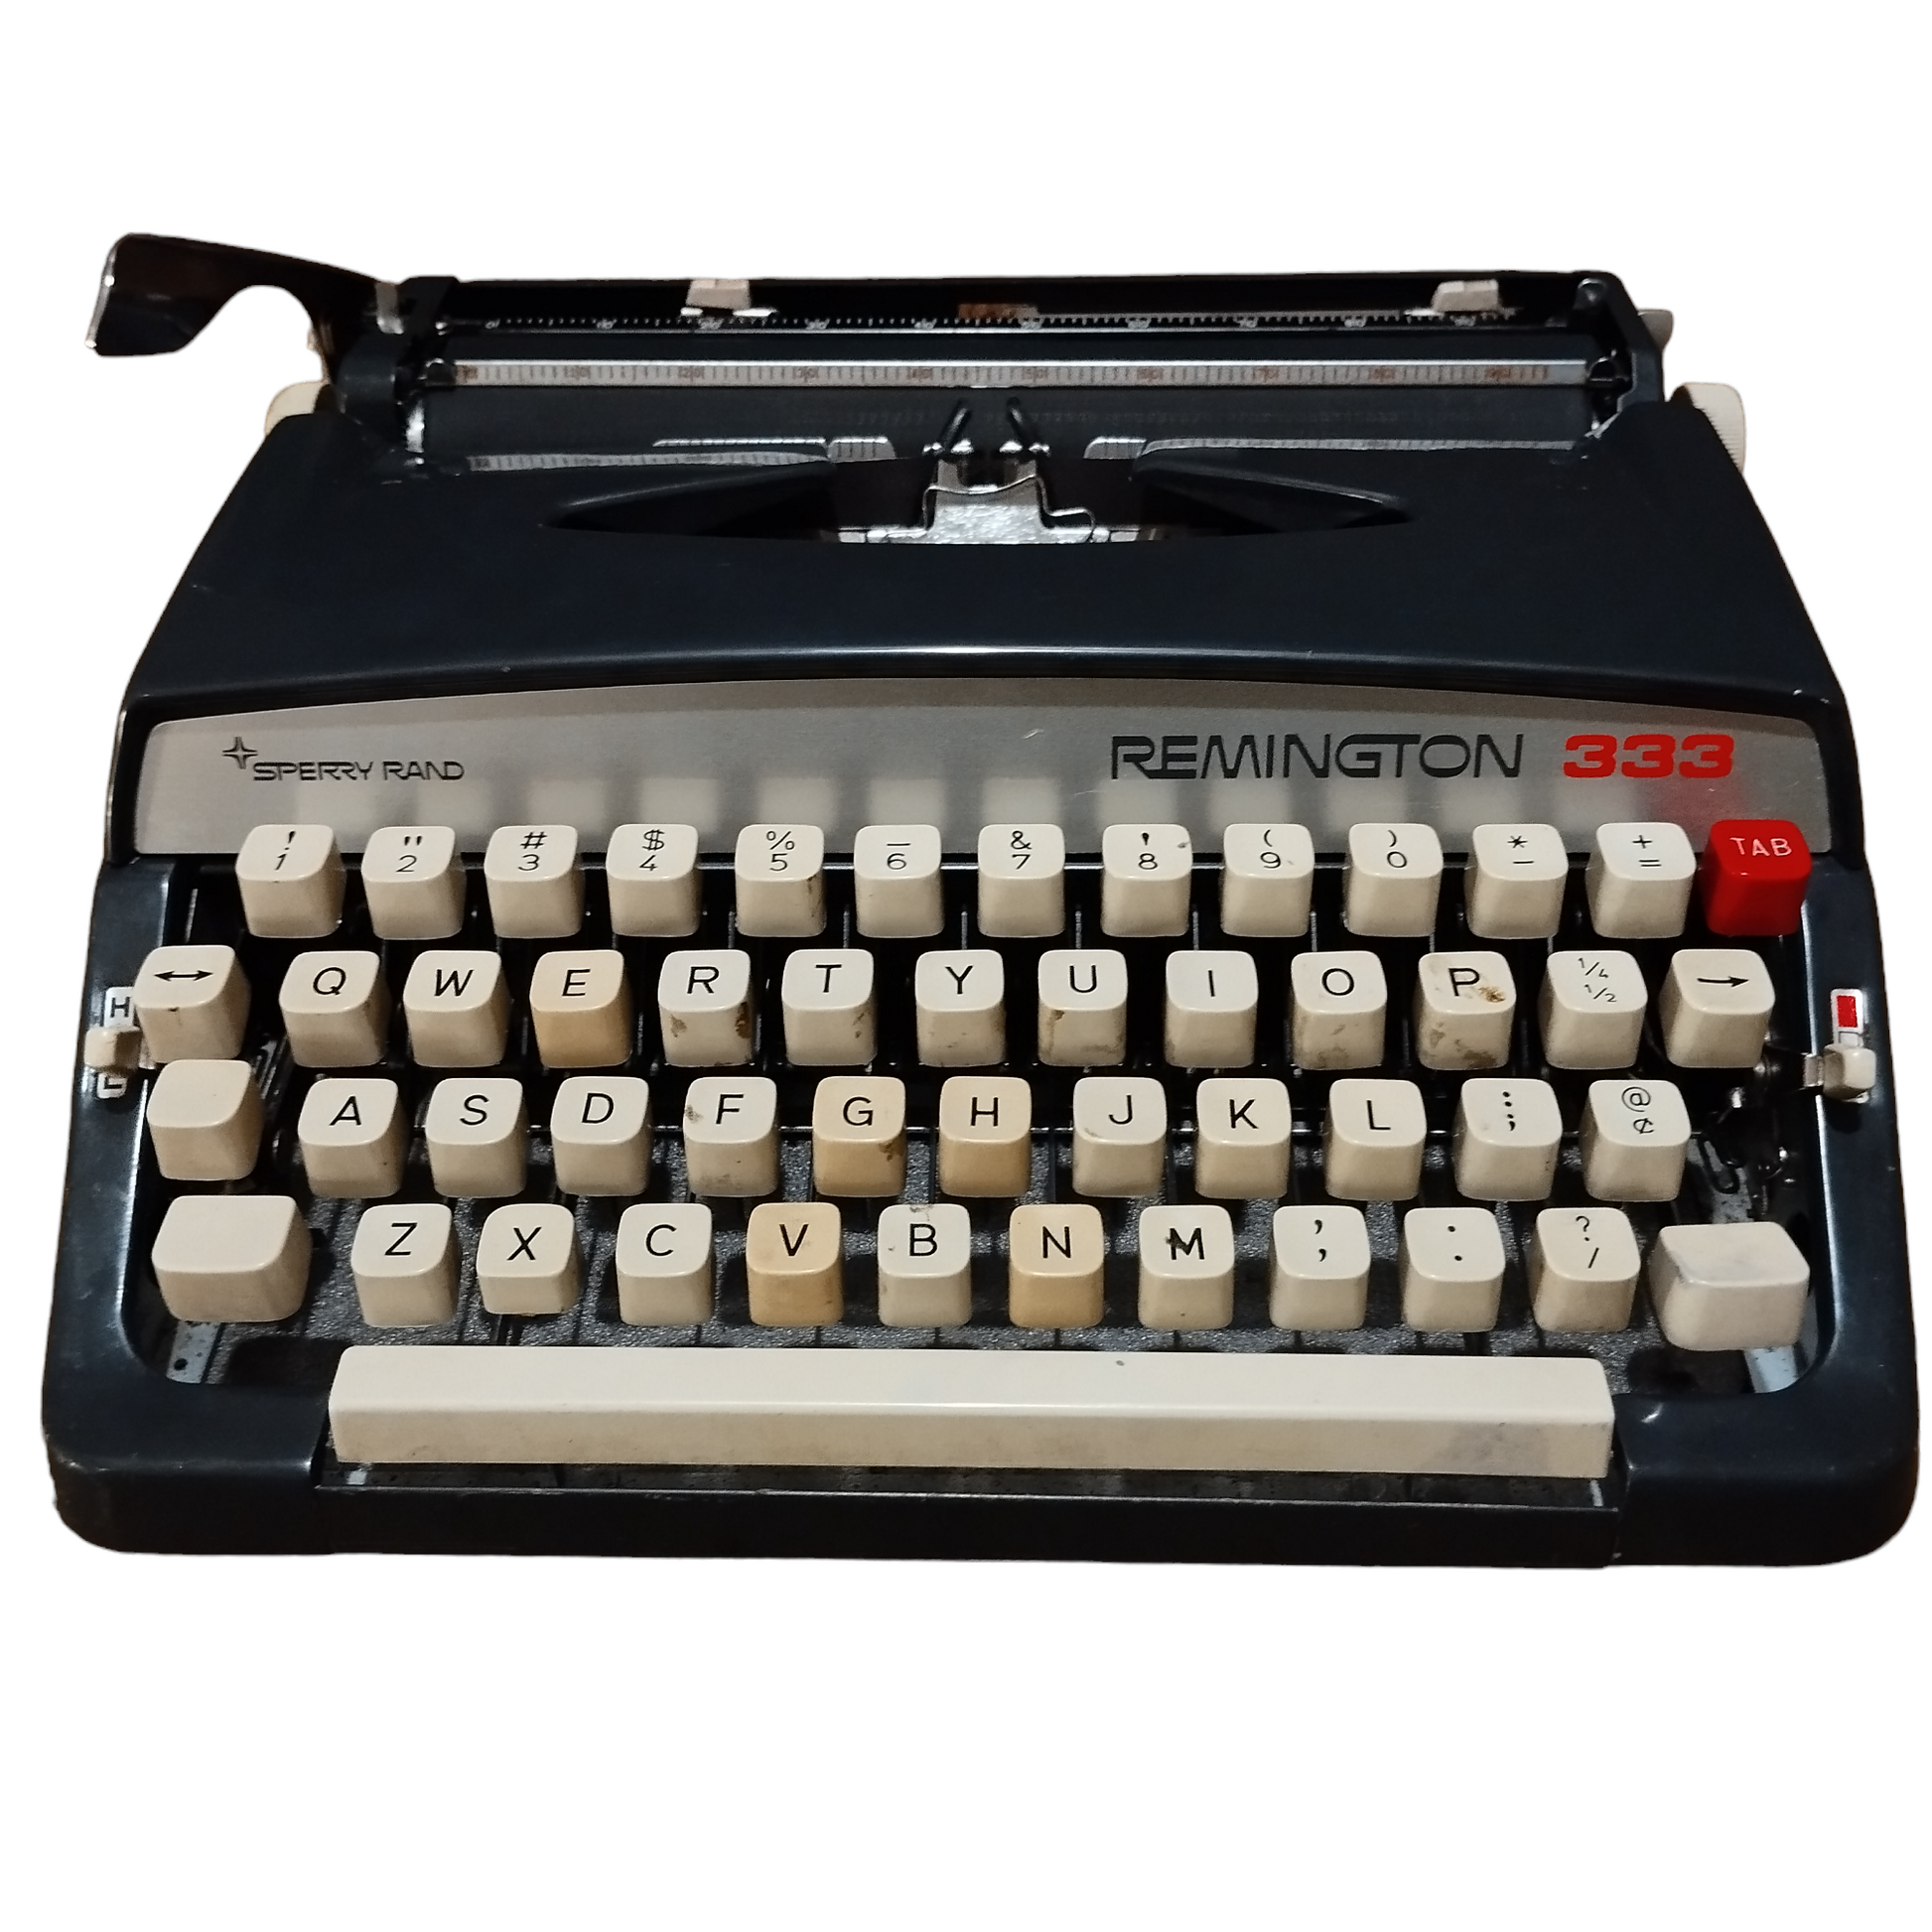 Image of Remington 333 Sperry Rand Typewriter. Available from universaltypewritercompany.in